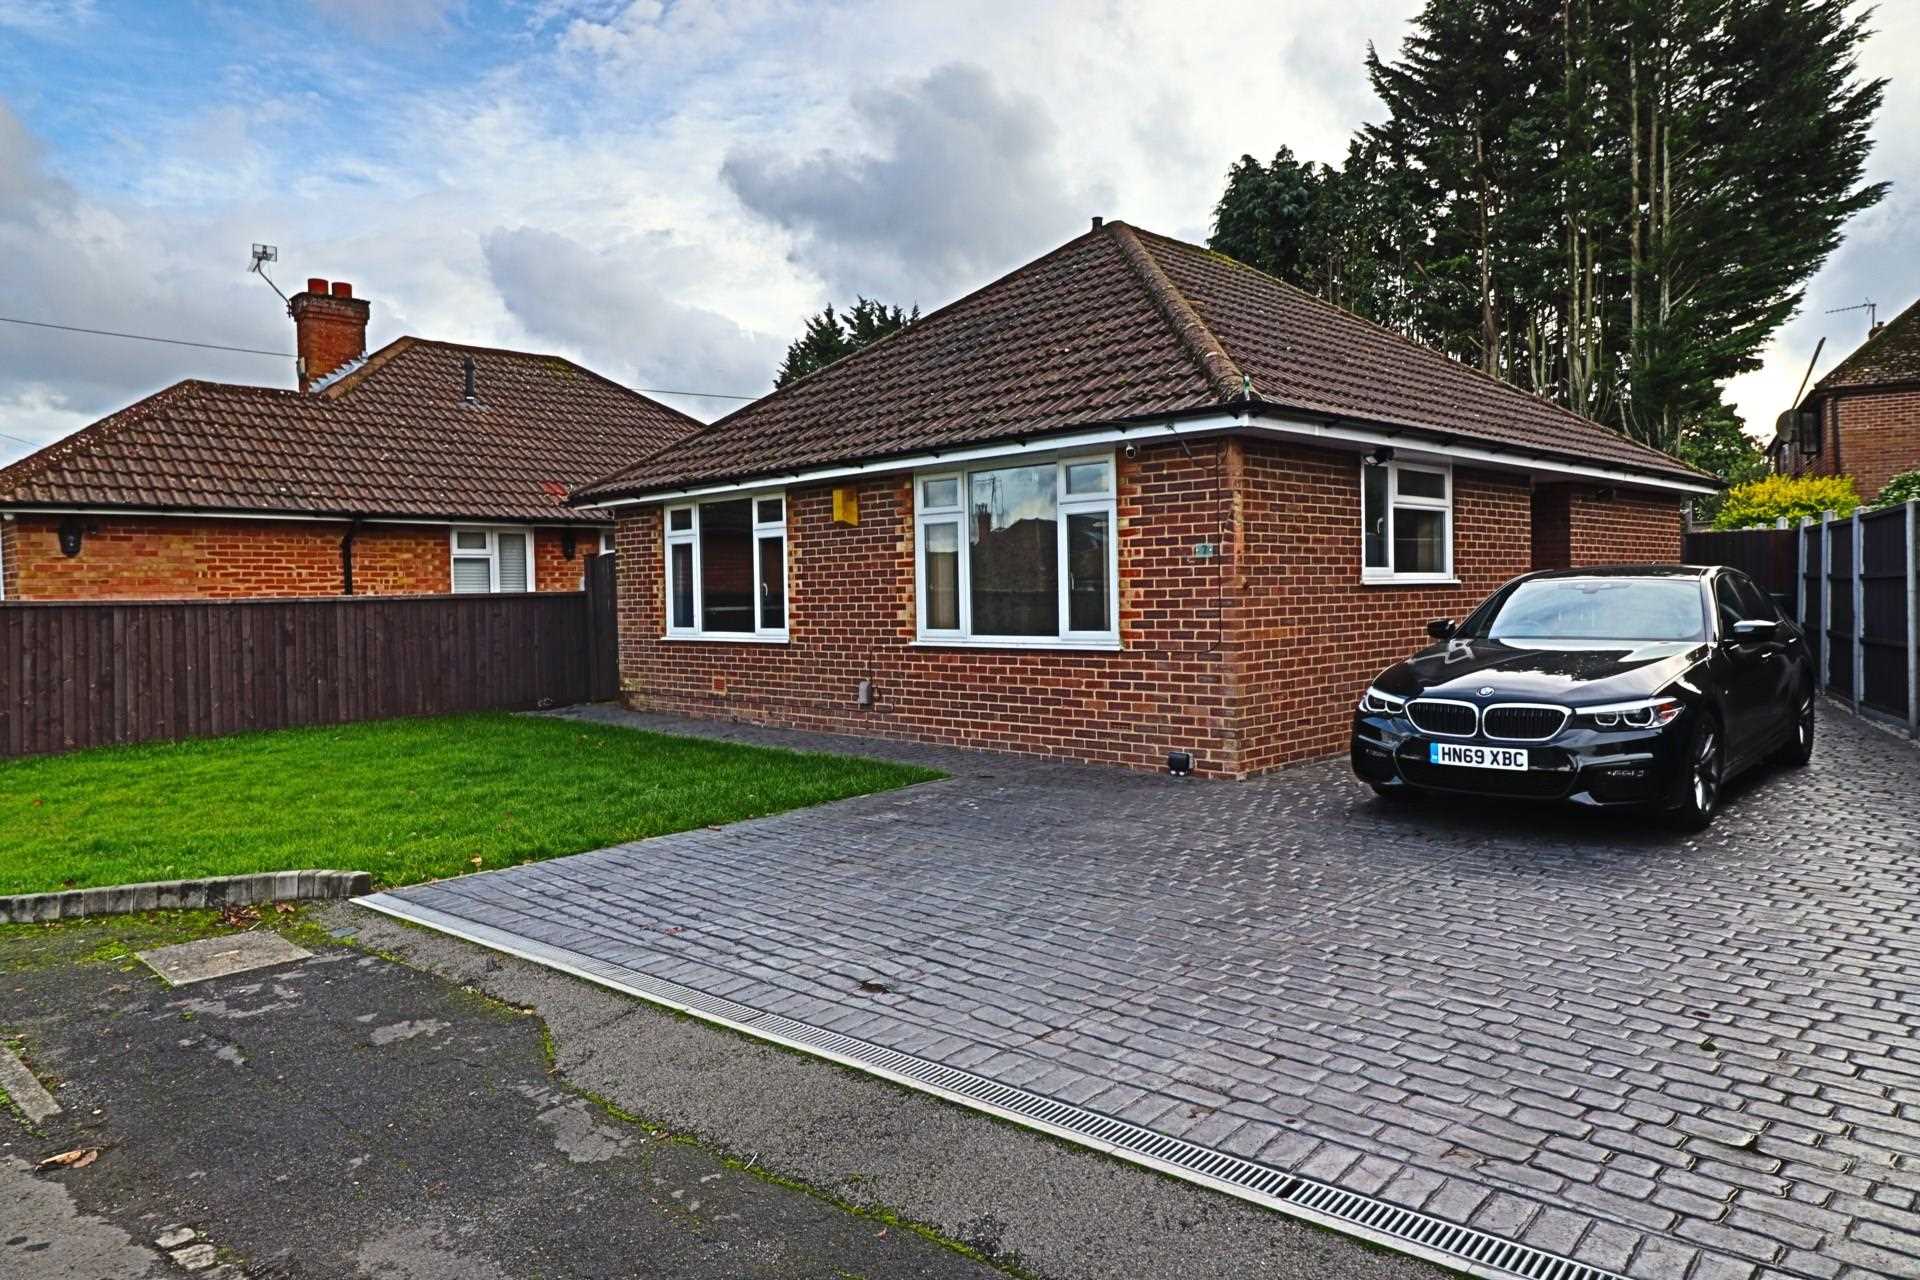 3 bed Detached House for rent in High Wycombe. From Eden Sales & Lettings - High Wycombe